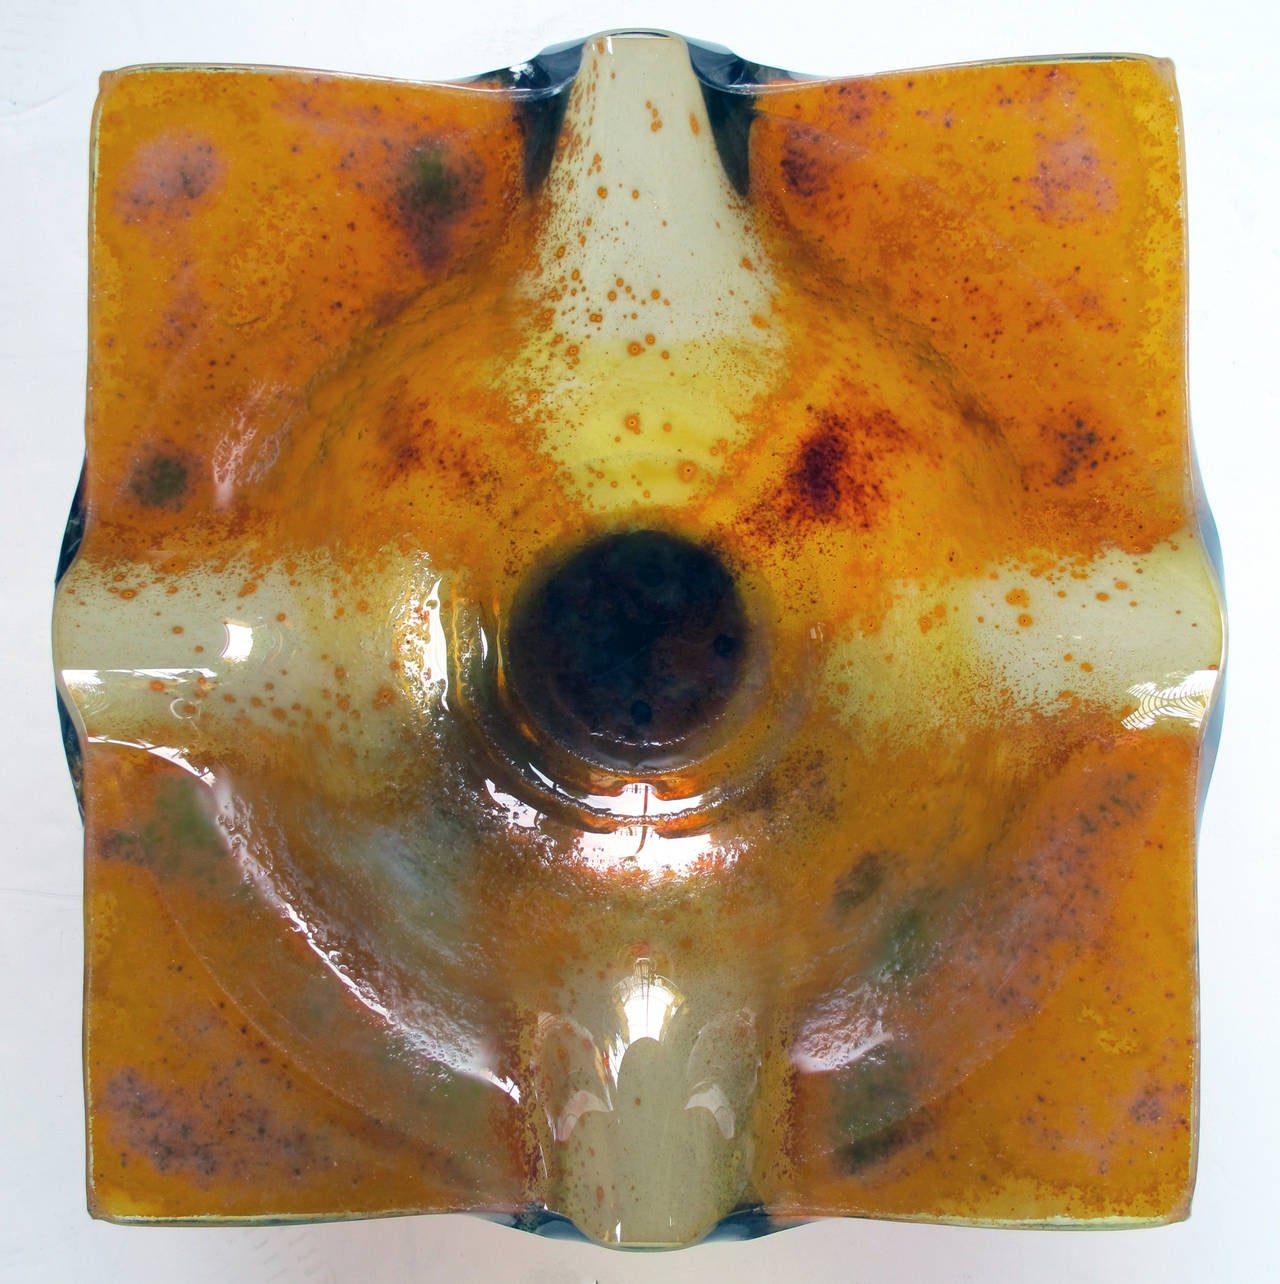 Thickly Modeled American Amber-Colored Bowl by Salvatore Polizzi 1